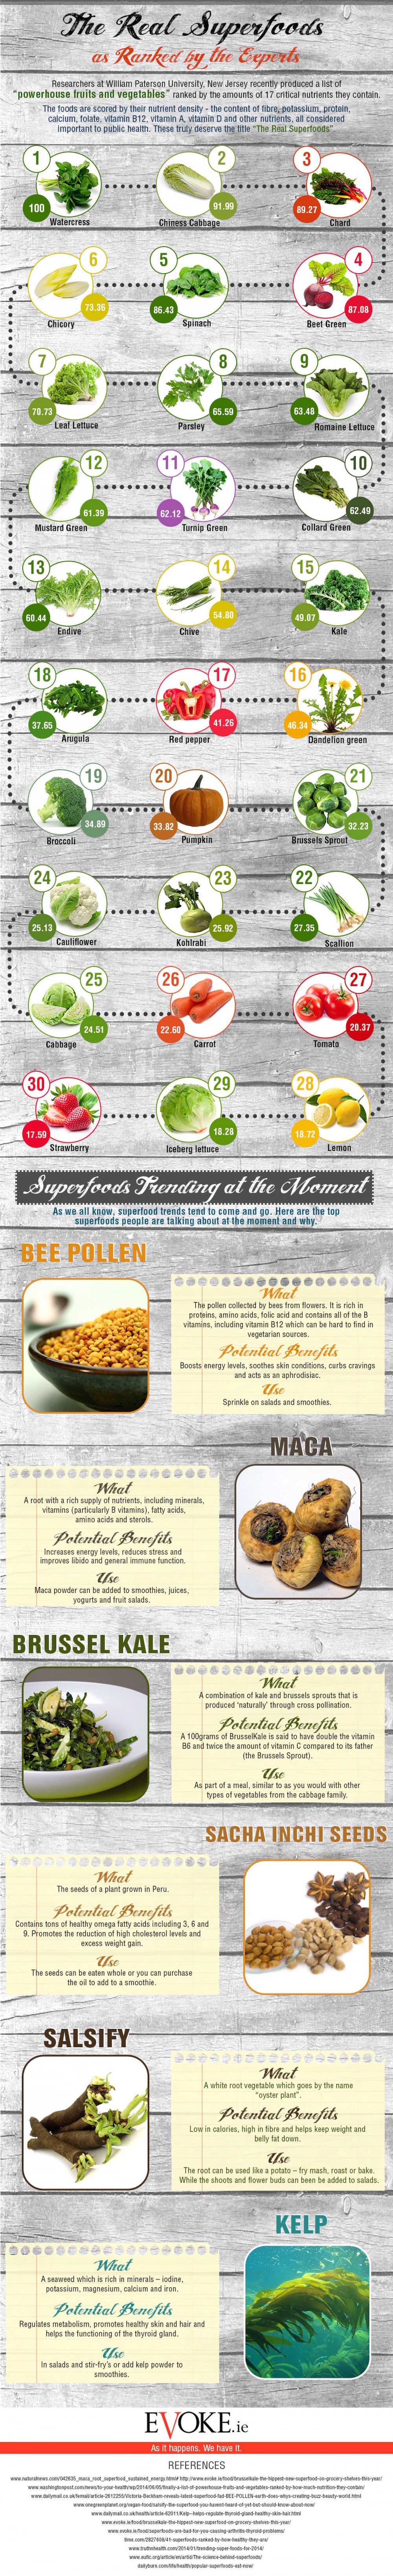 infographic--the-truth-about-superfoods 3